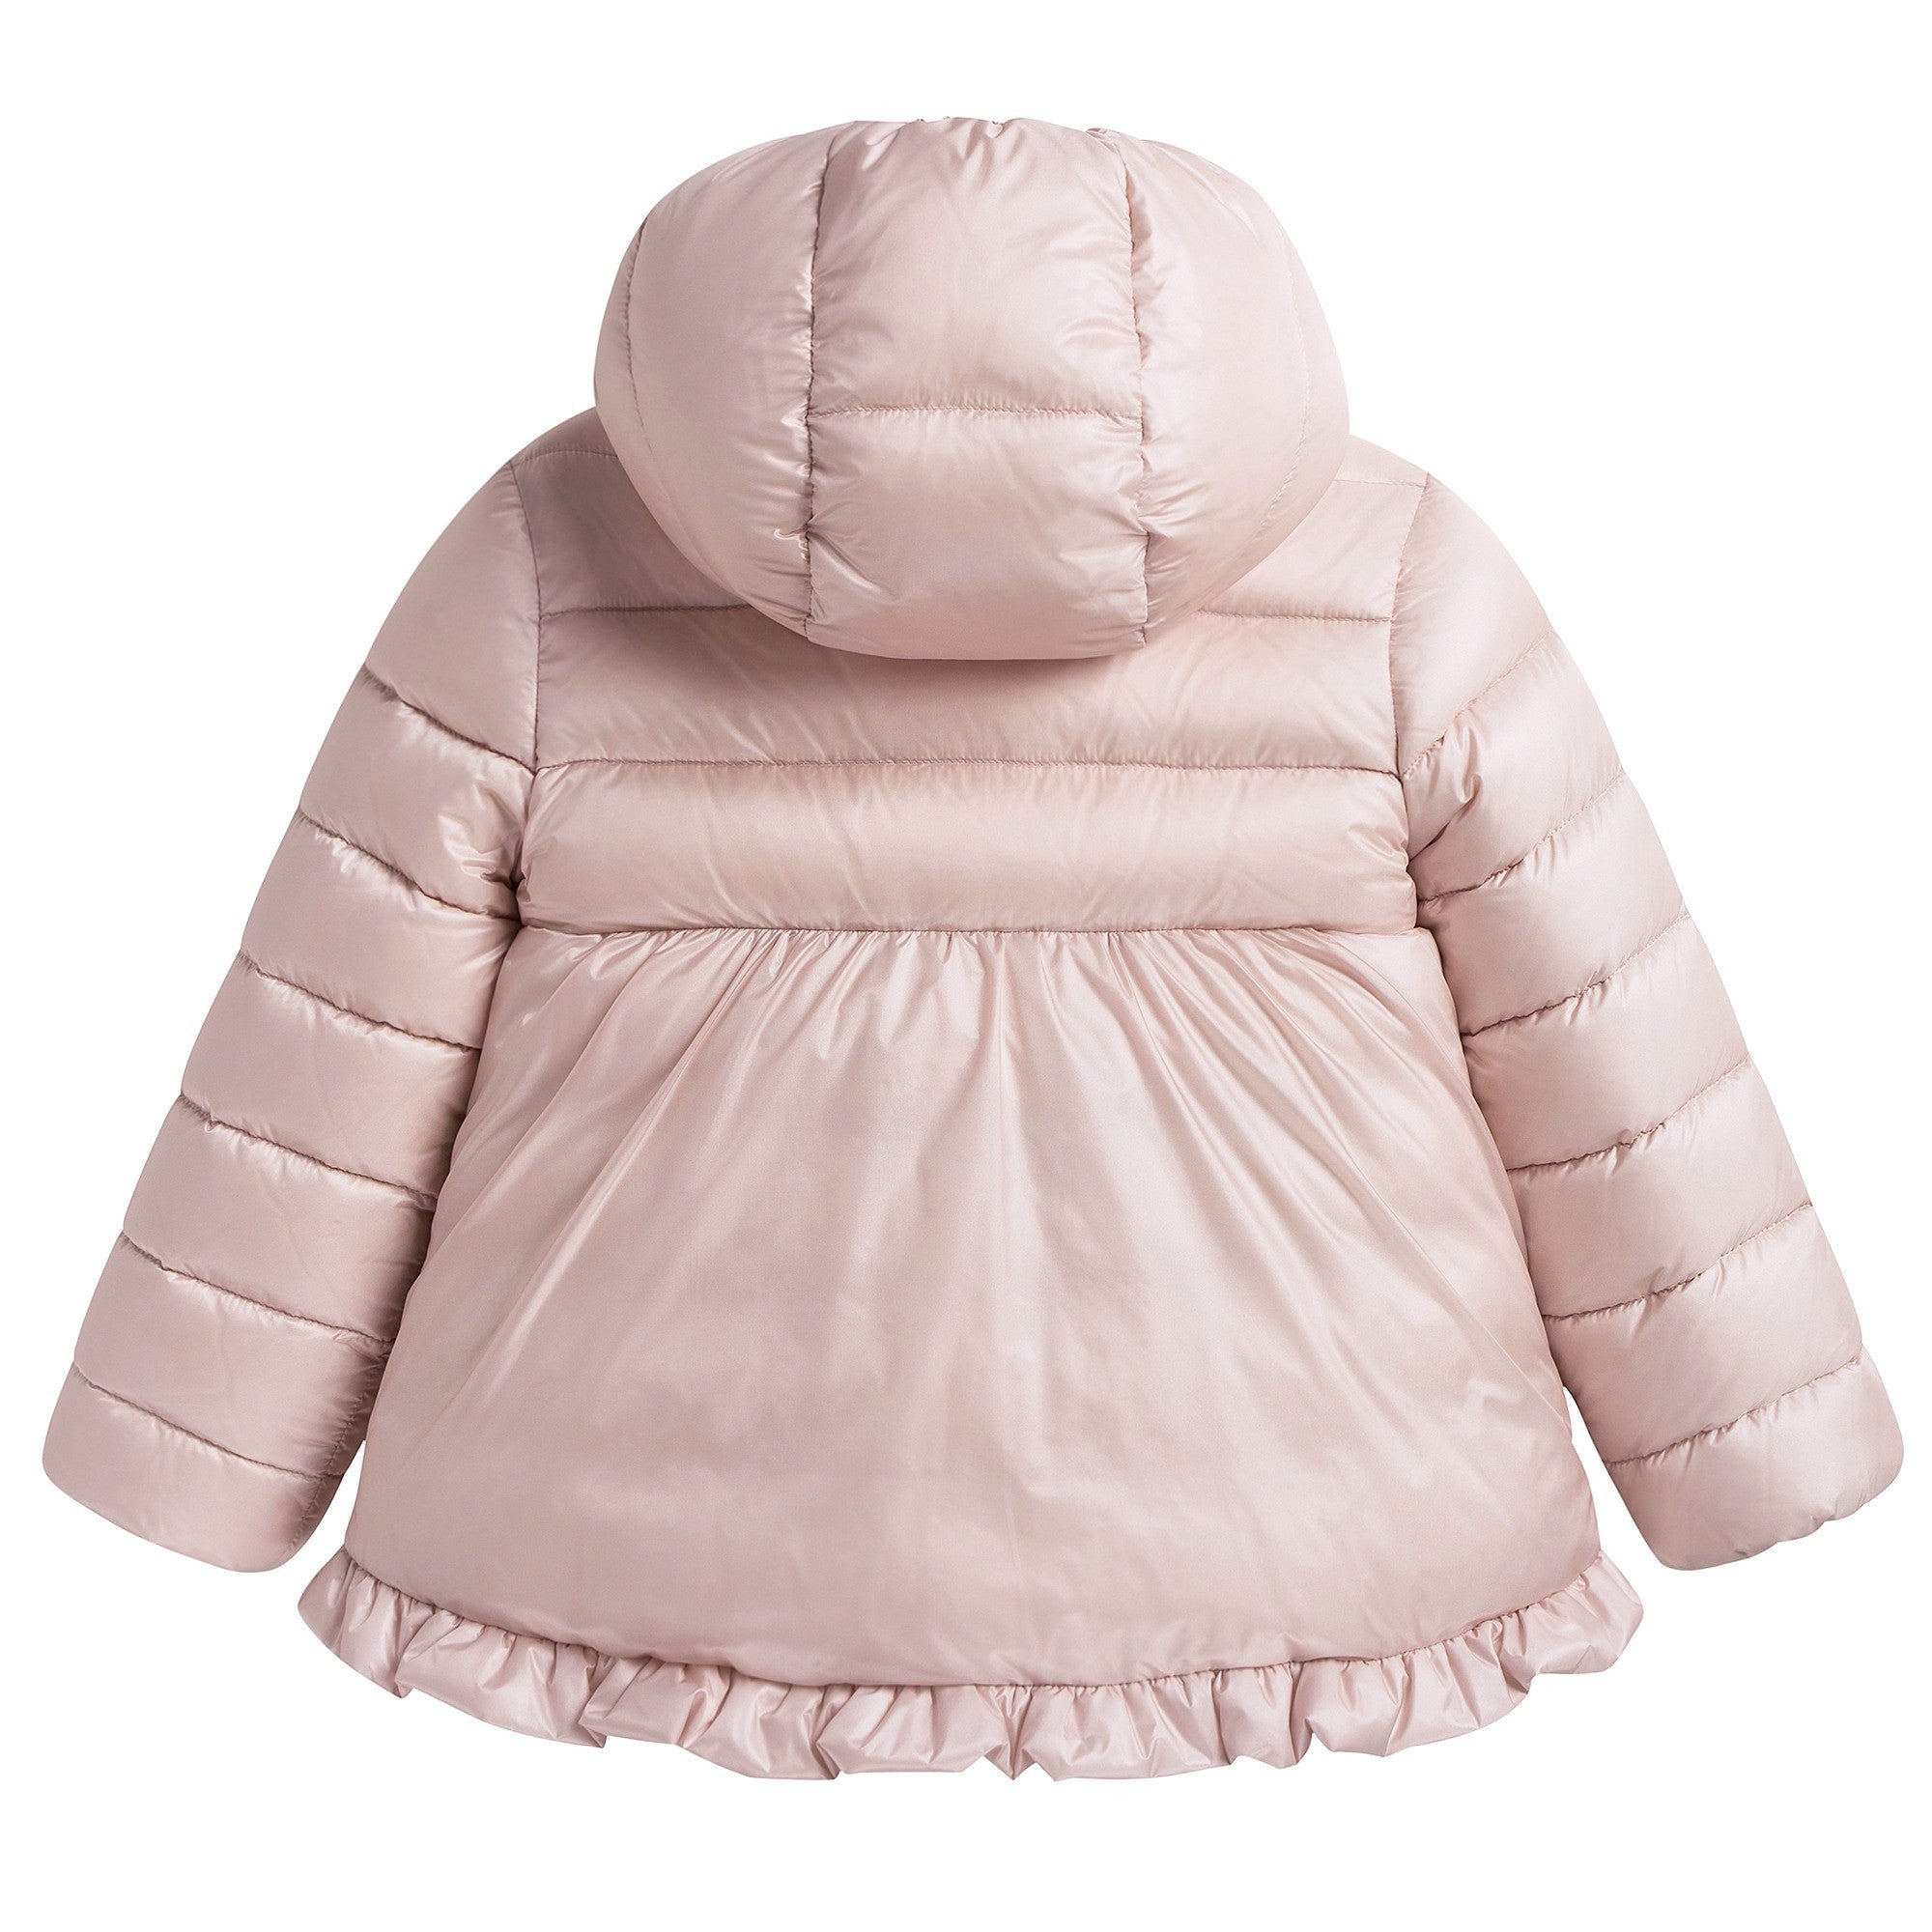 Baby Girls Pink "Odile" Down Padded Coat